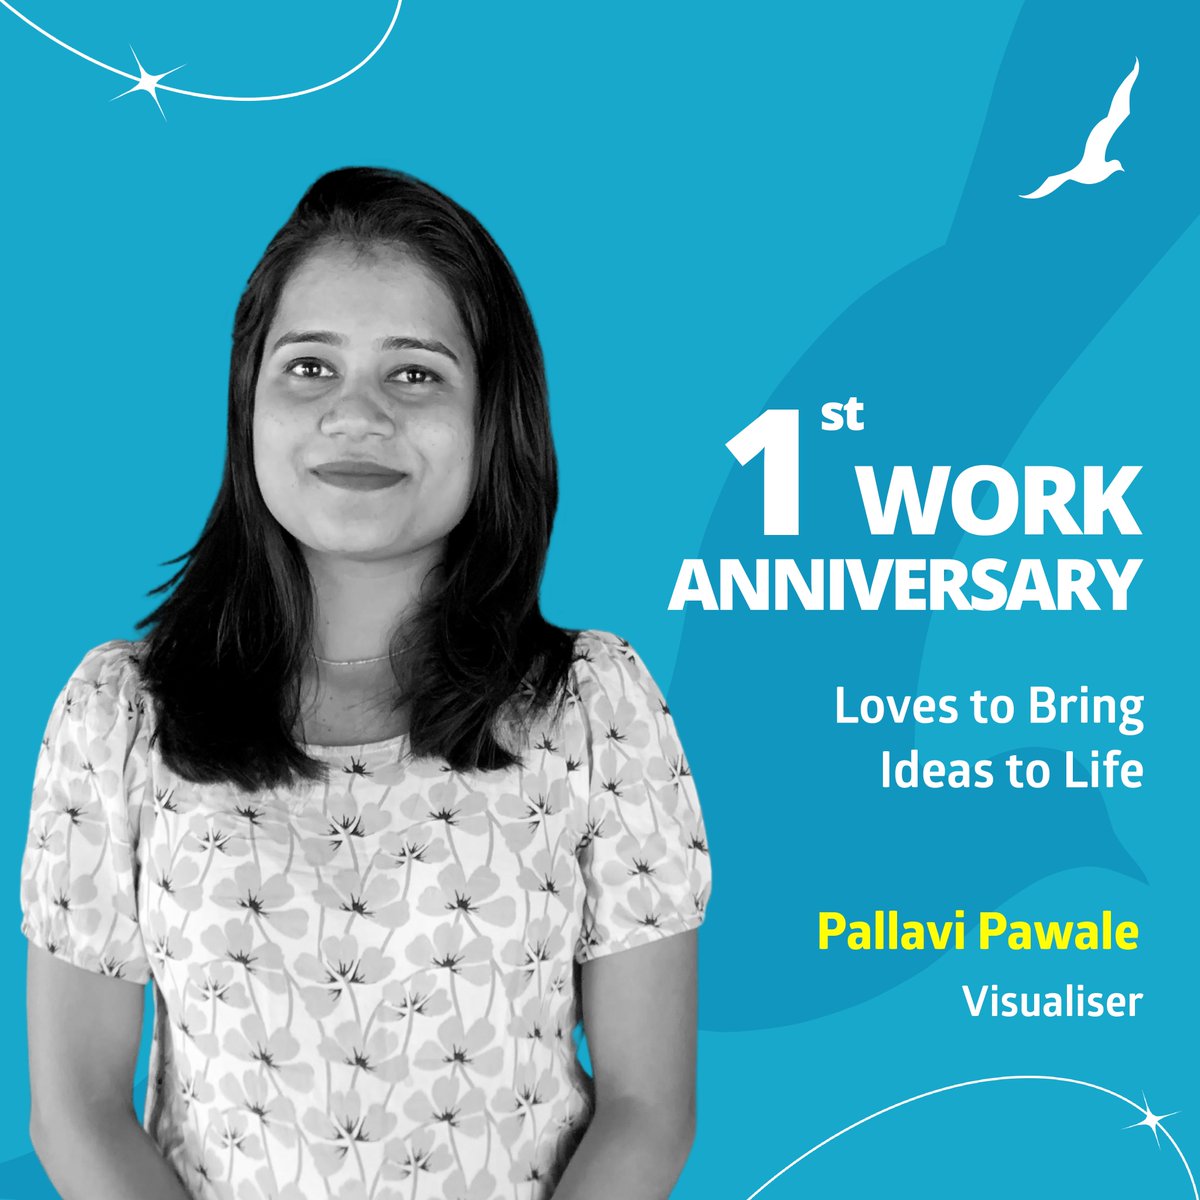 When she visualises ideas with her imaginative vision and incredible creative prowesses, ideas become alive. Wishing you happy 1st Work Anniversary, Pallavi Pawale. Have a great one!
.
.
.
#SeagullAdvertising #IdeasThatSoar #AdvertisingAgency #WorkAnniversary